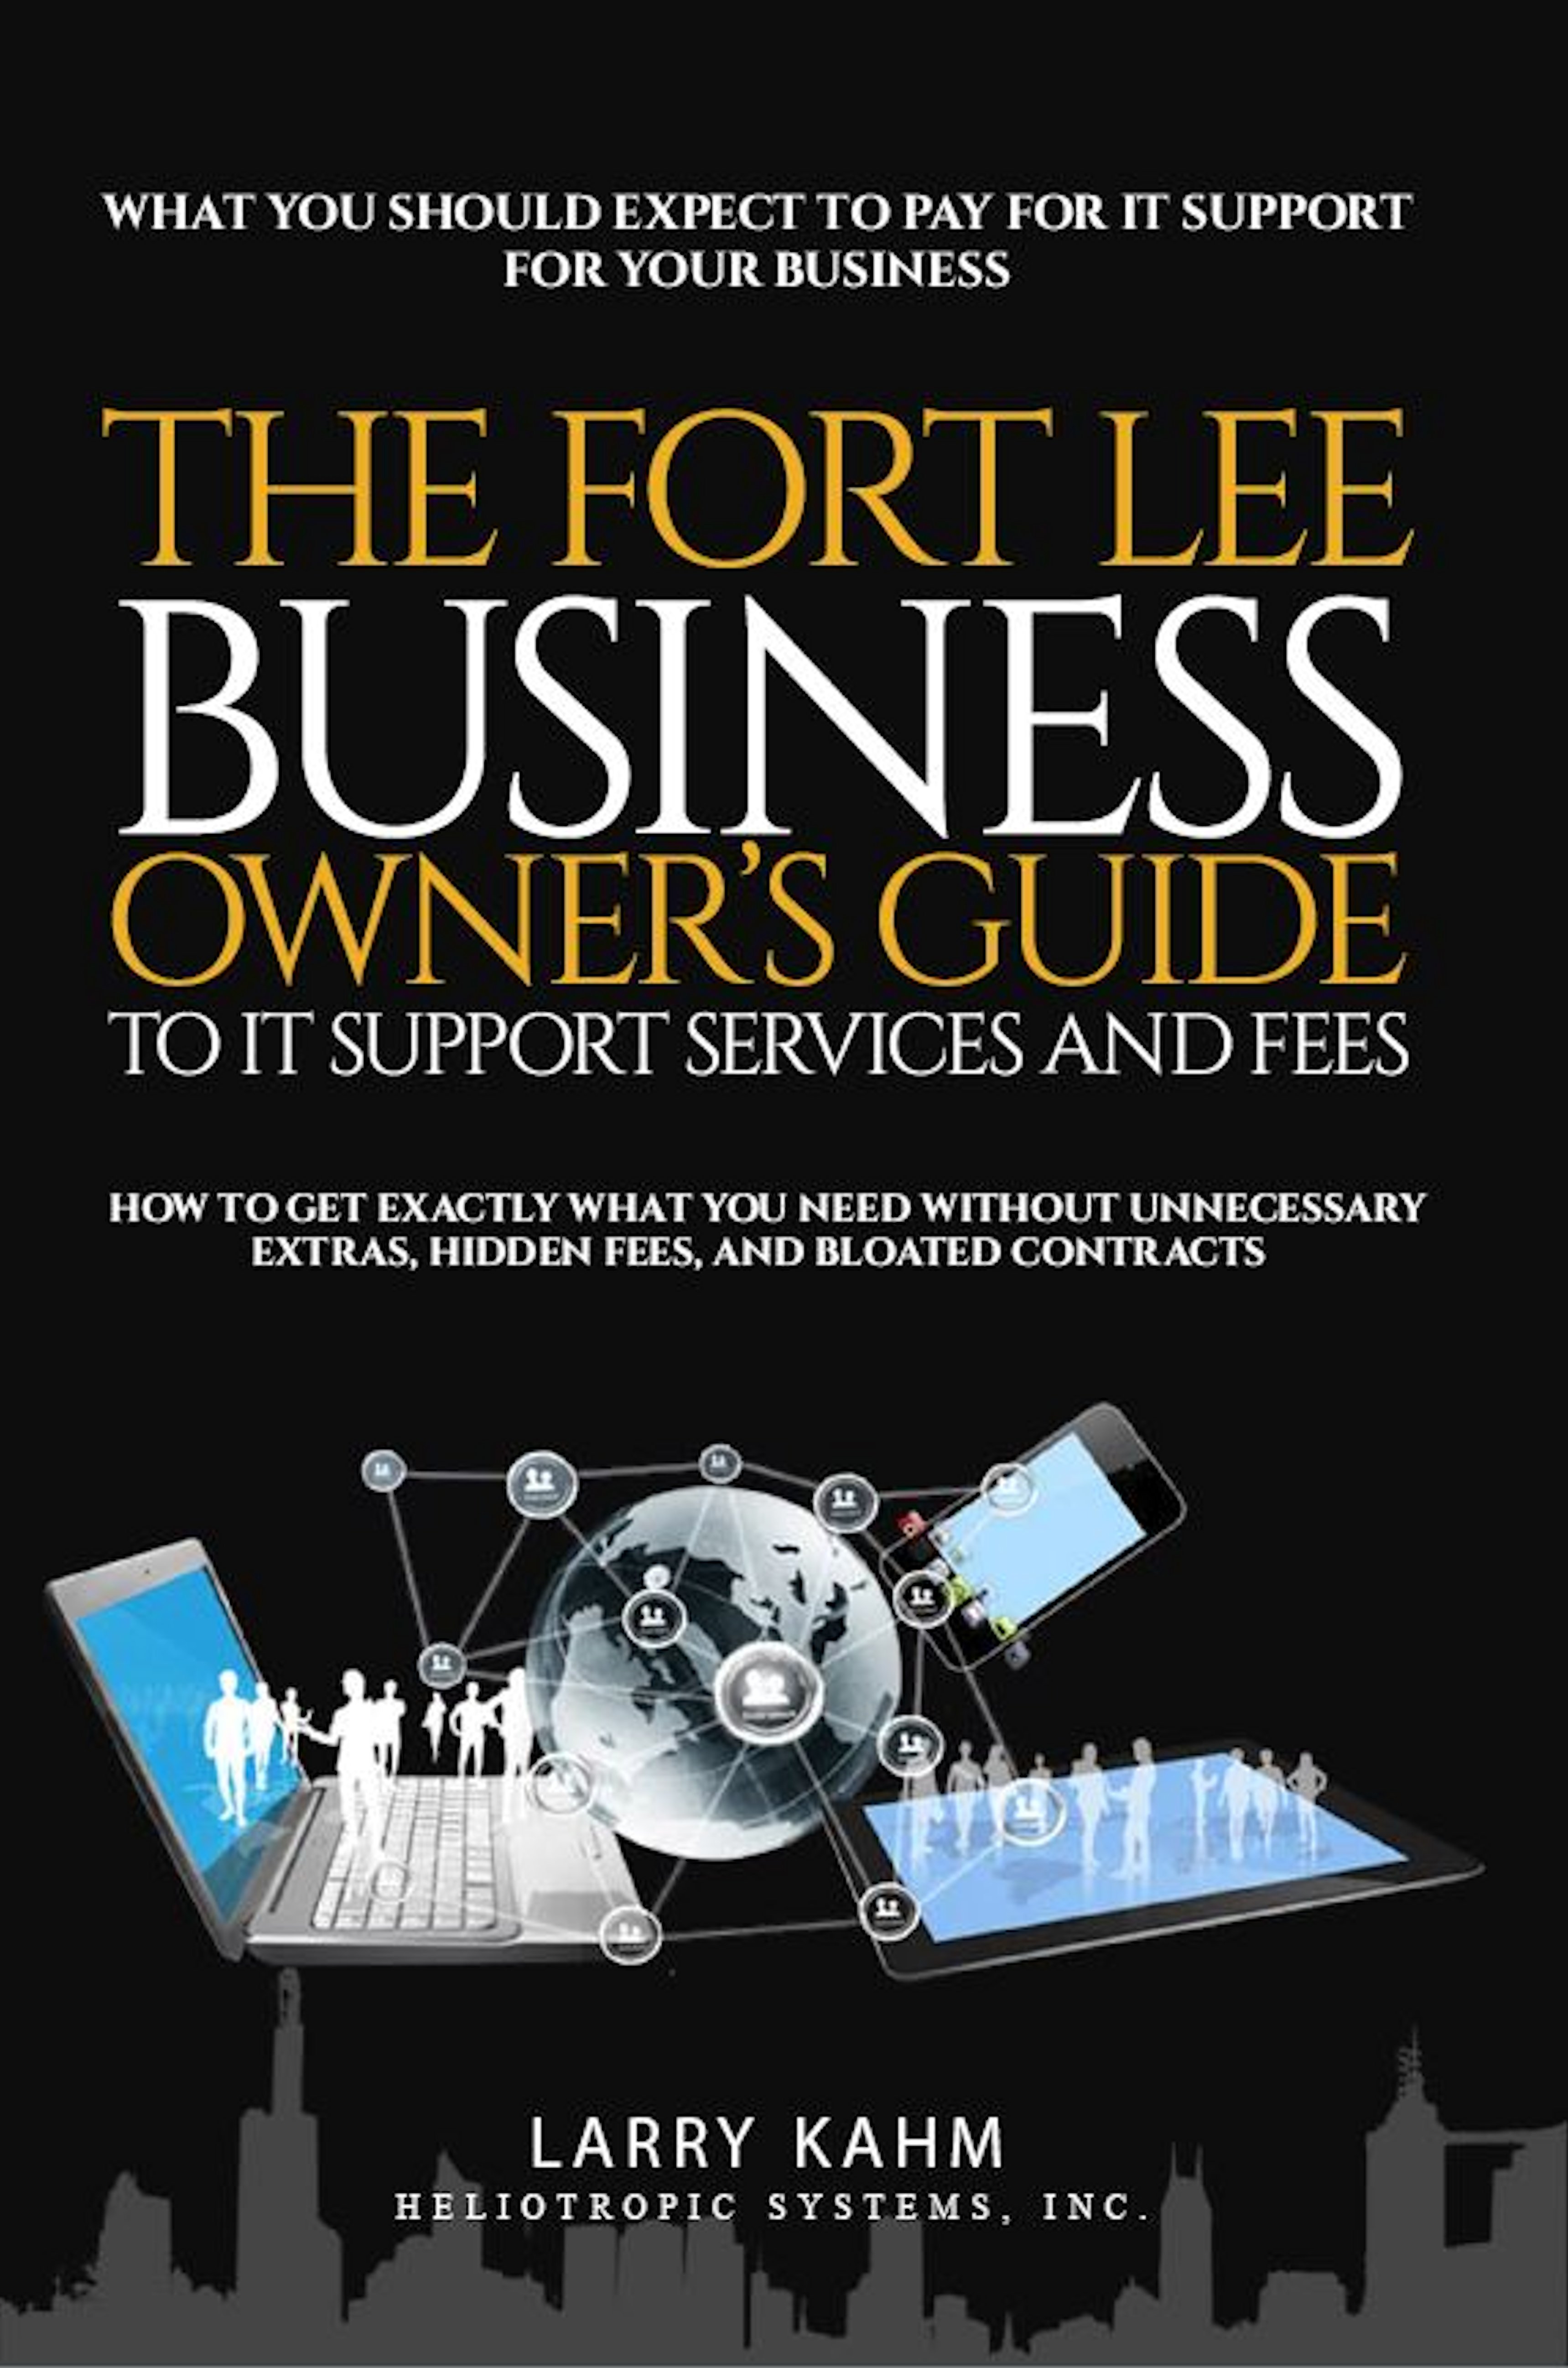 The Fort Lee Business Owner's Guide to IT Support Services and Fees